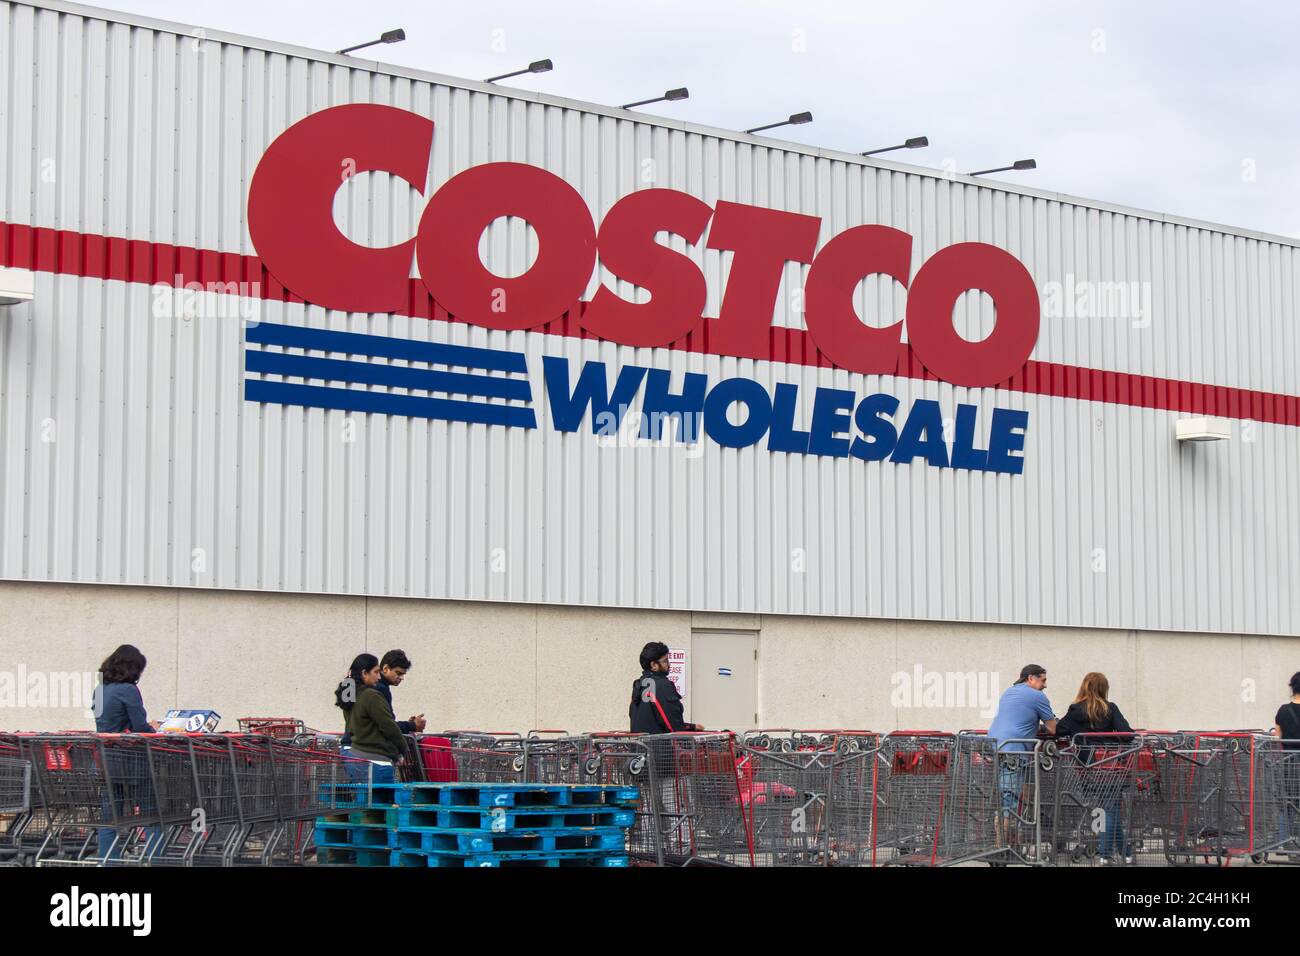 Costco Wholesale logo on a store as customers wait in-line during the COVID-19 coronavirus global pandemic. Stock Photo